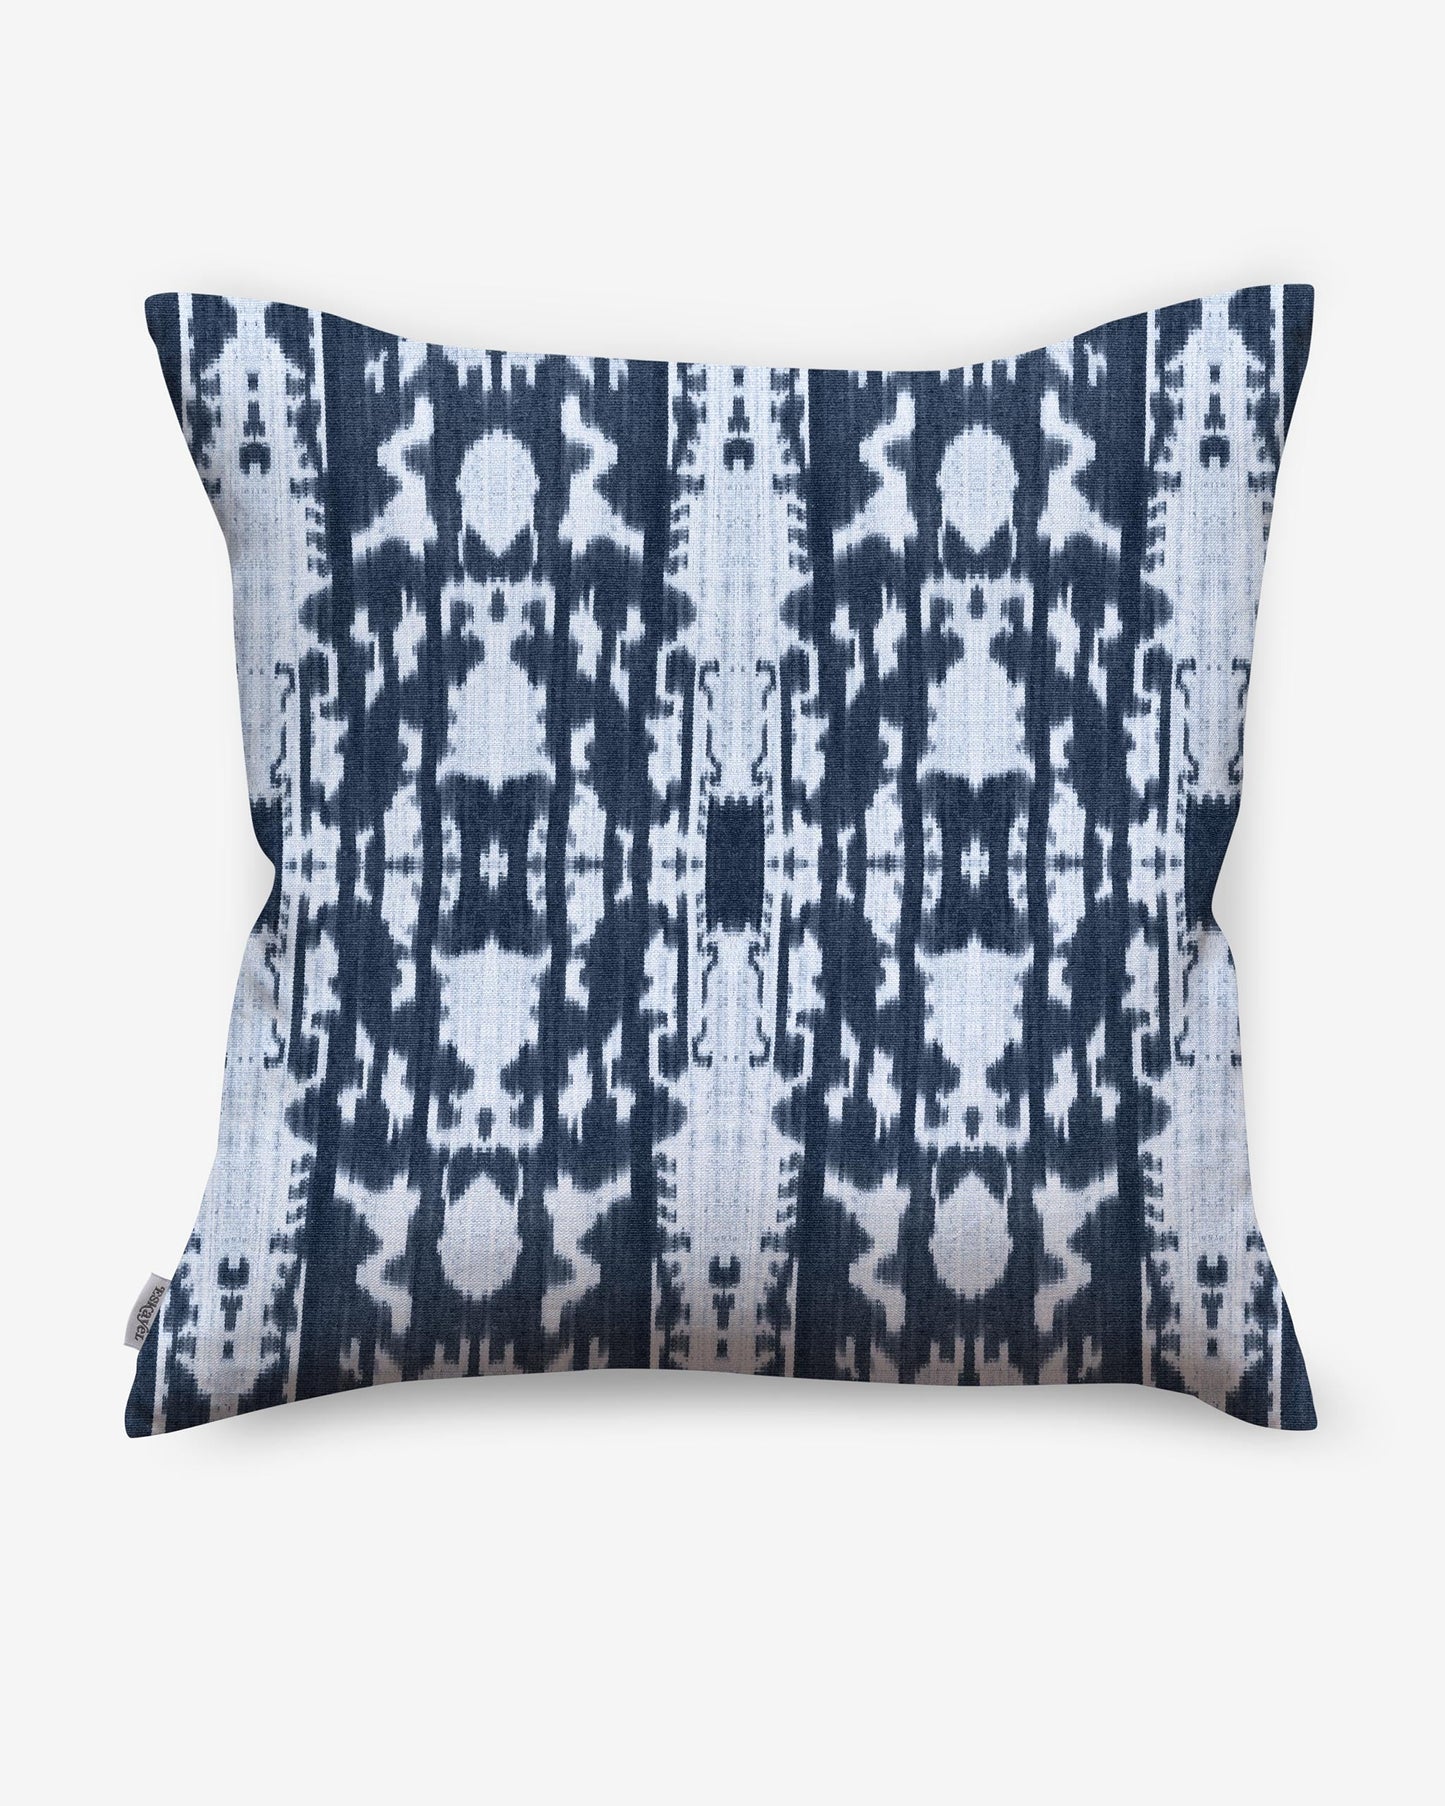 A Biami Pillow, perfect for adding a touch of luxury to any room